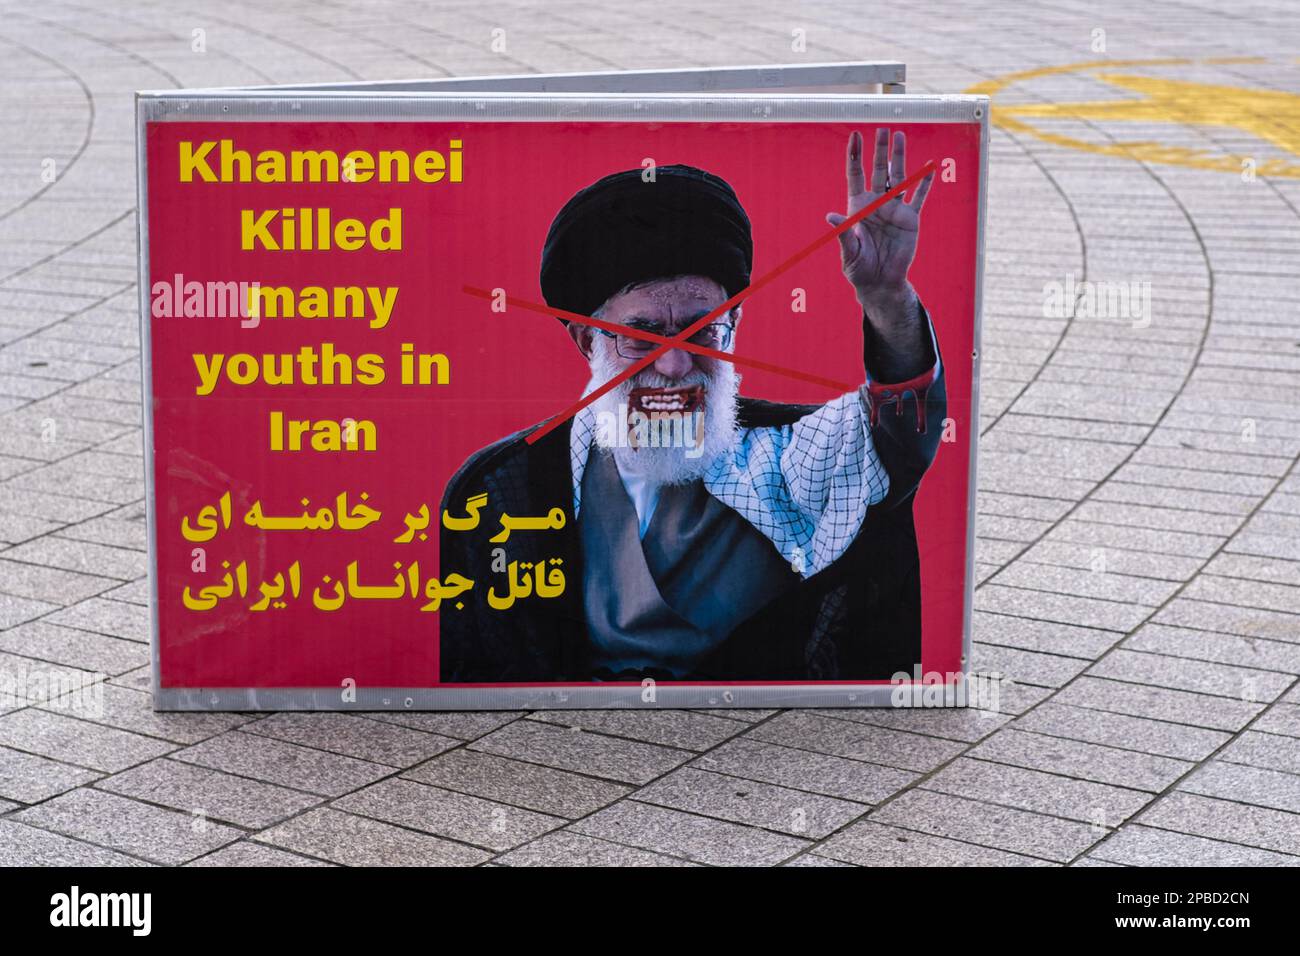 Anti Khamenei poster in Trafalgar Square - activists protest in London against the Iranian Regime because of their murderous regime. Stock Photo